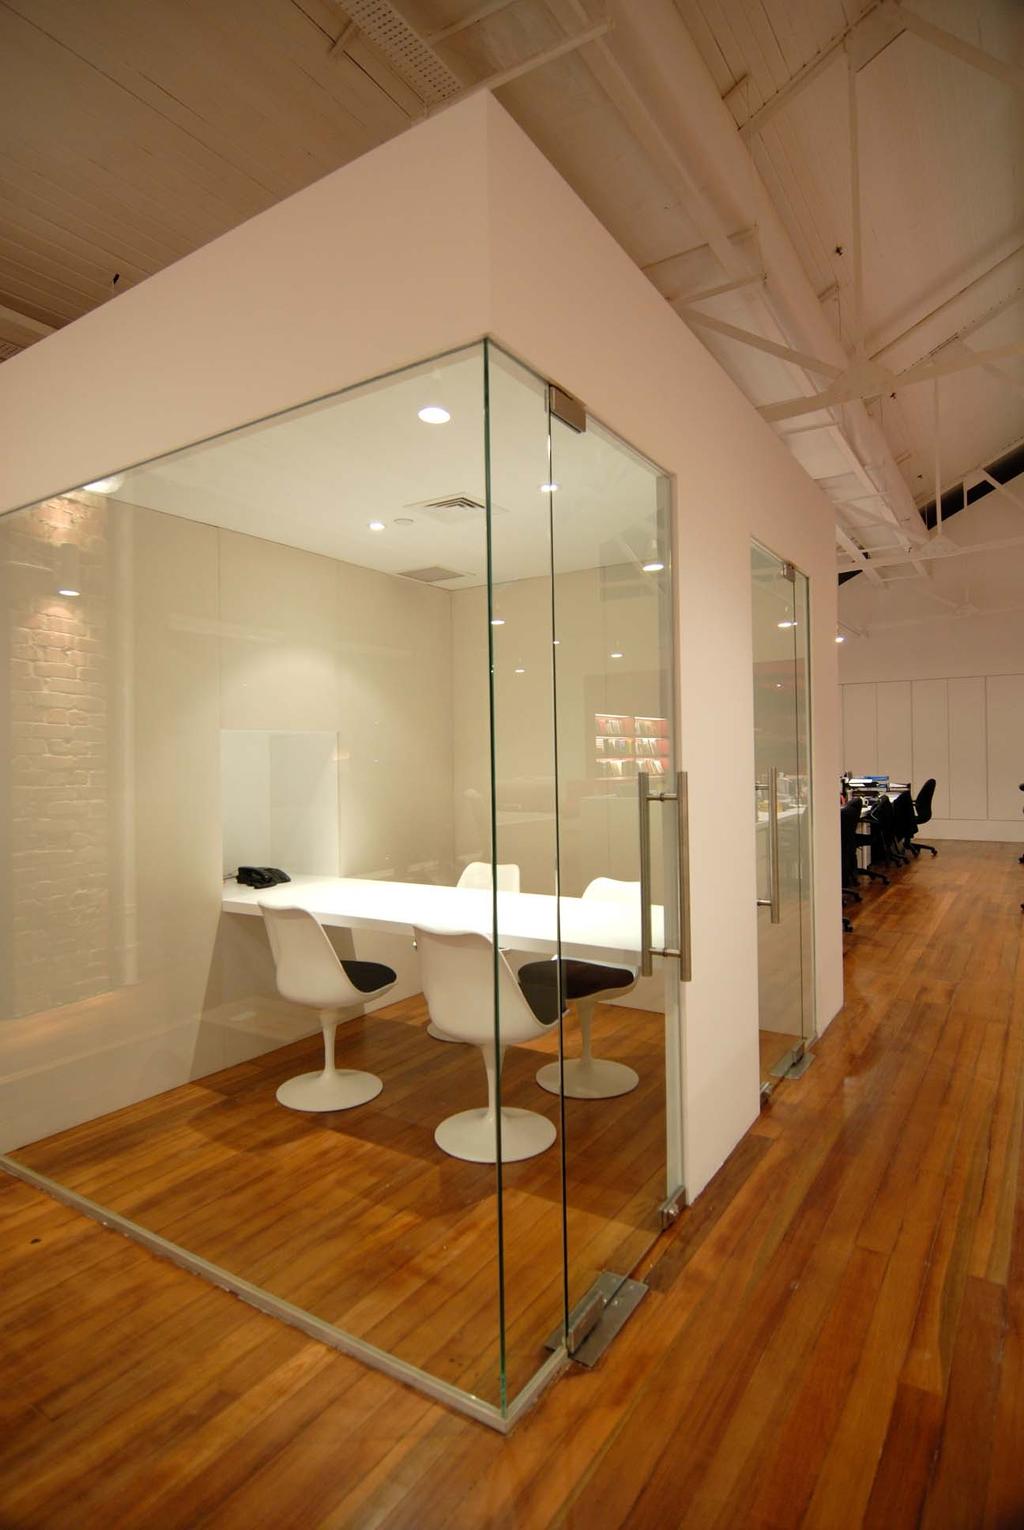 BBH, Commercial, Architect, Ministry of Design, Contemporary, Glass Doors, Glass Walls, Wooden Flooring, Laminated Flooring, White Study Desk, White Chair, Indoors, Interior Design, Dining Room, Room